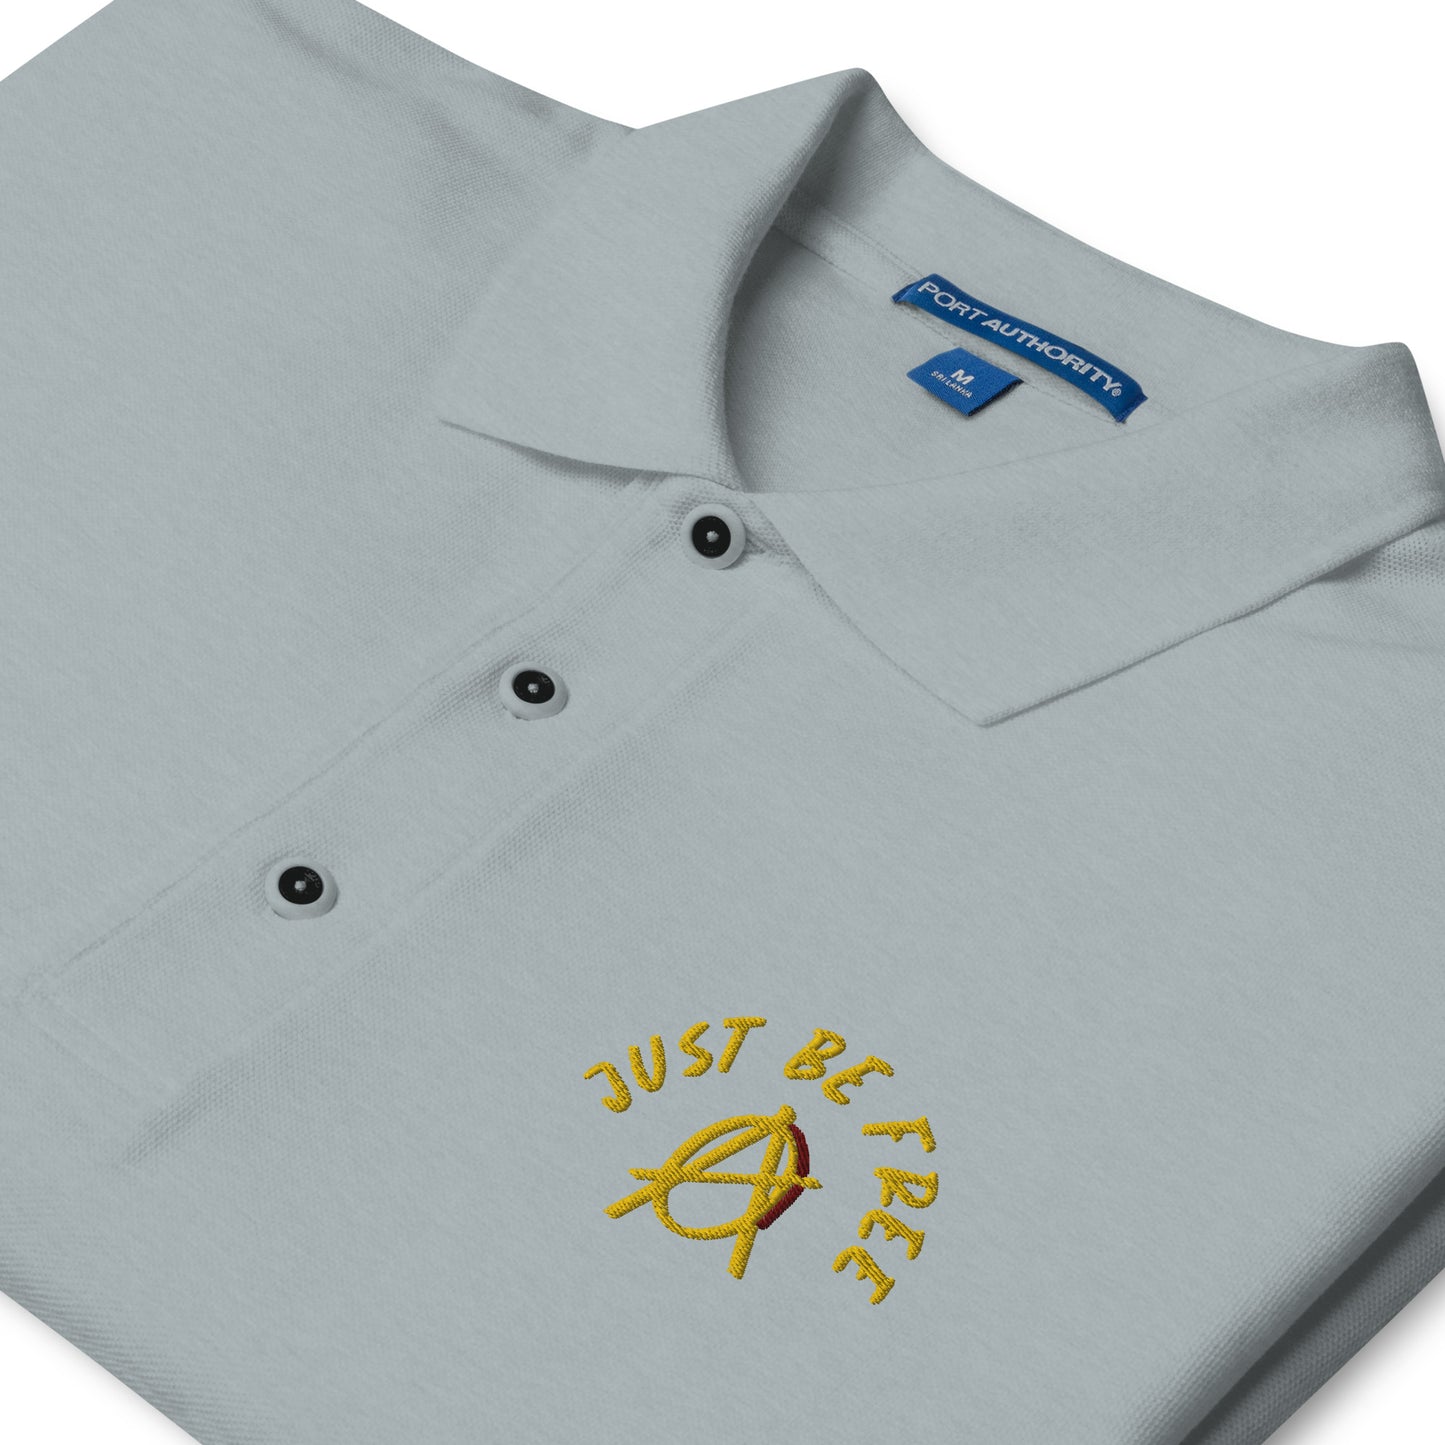 Anarchy Wear "Just Be Free" Men's Premium Polo